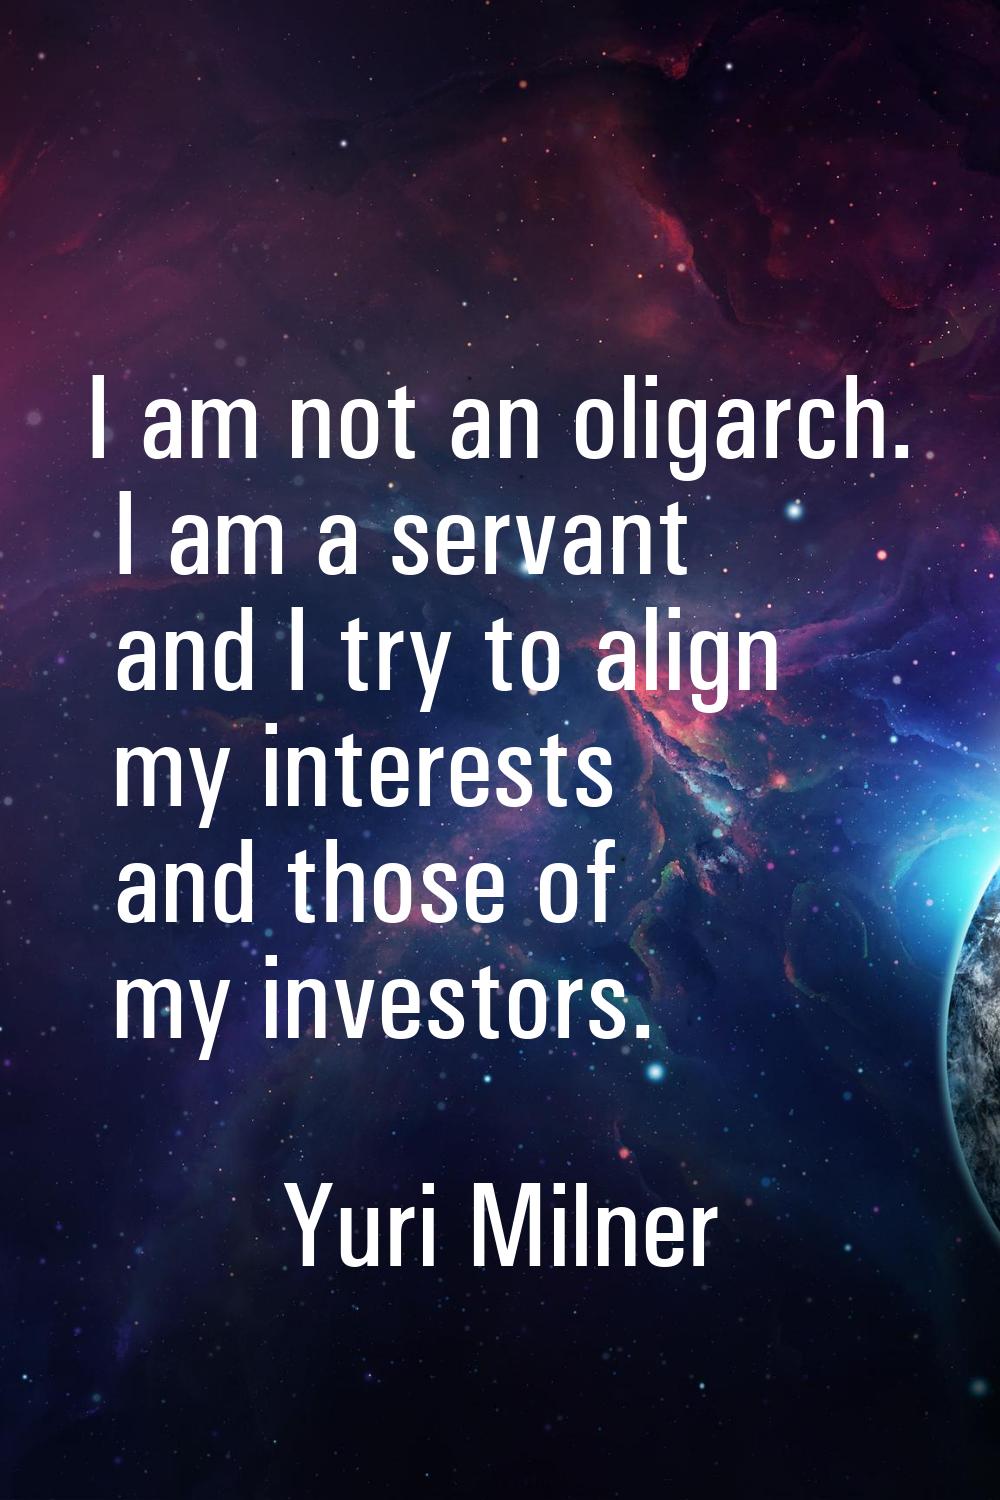 I am not an oligarch. I am a servant and I try to align my interests and those of my investors.